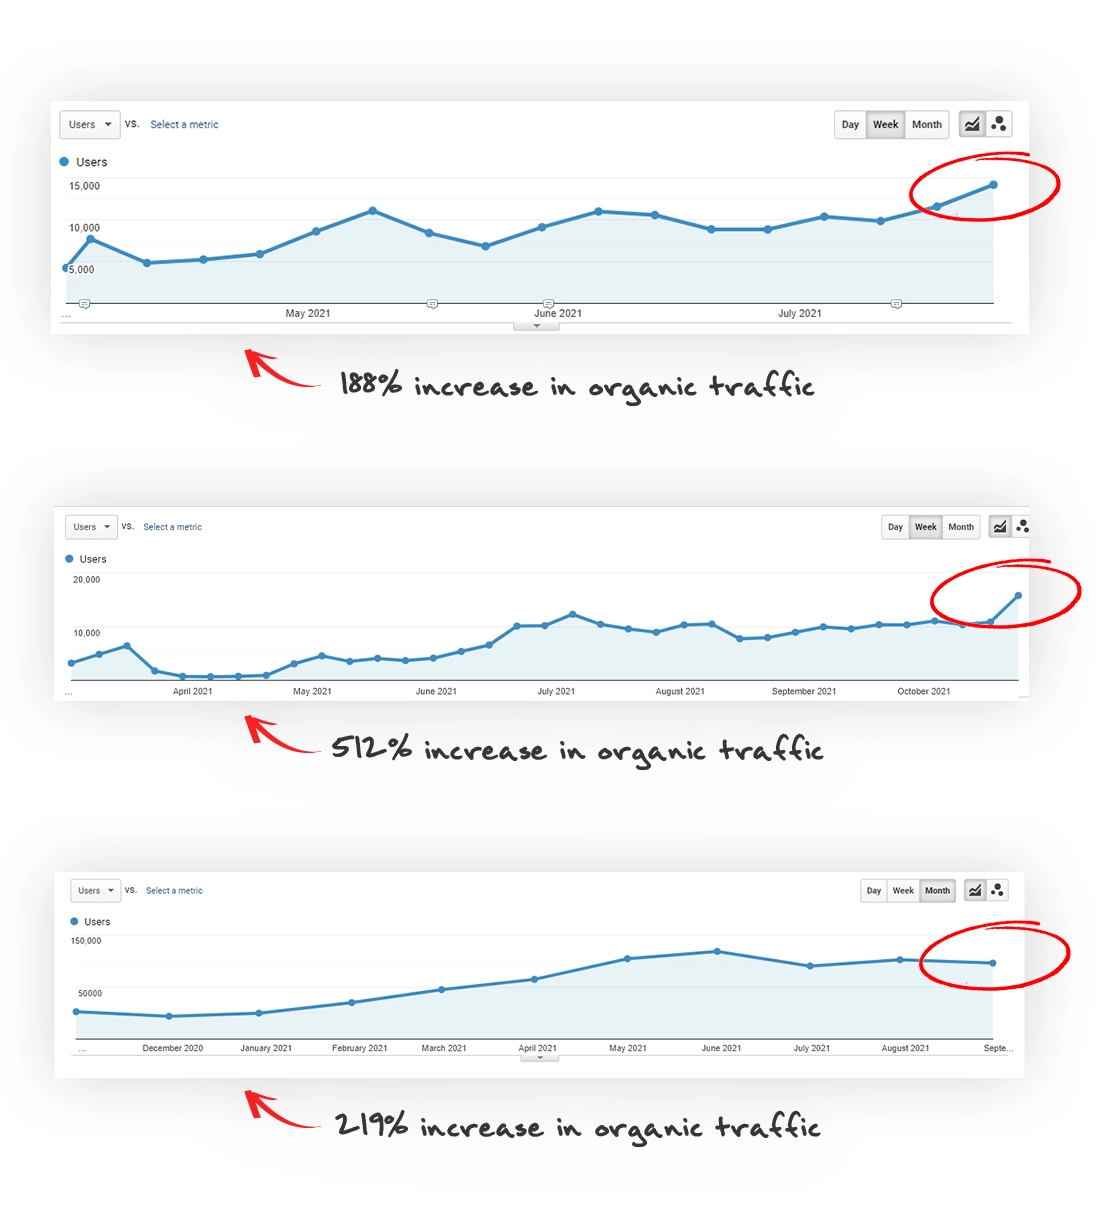 SEO organic growth achieved by Logicloop for its clients.